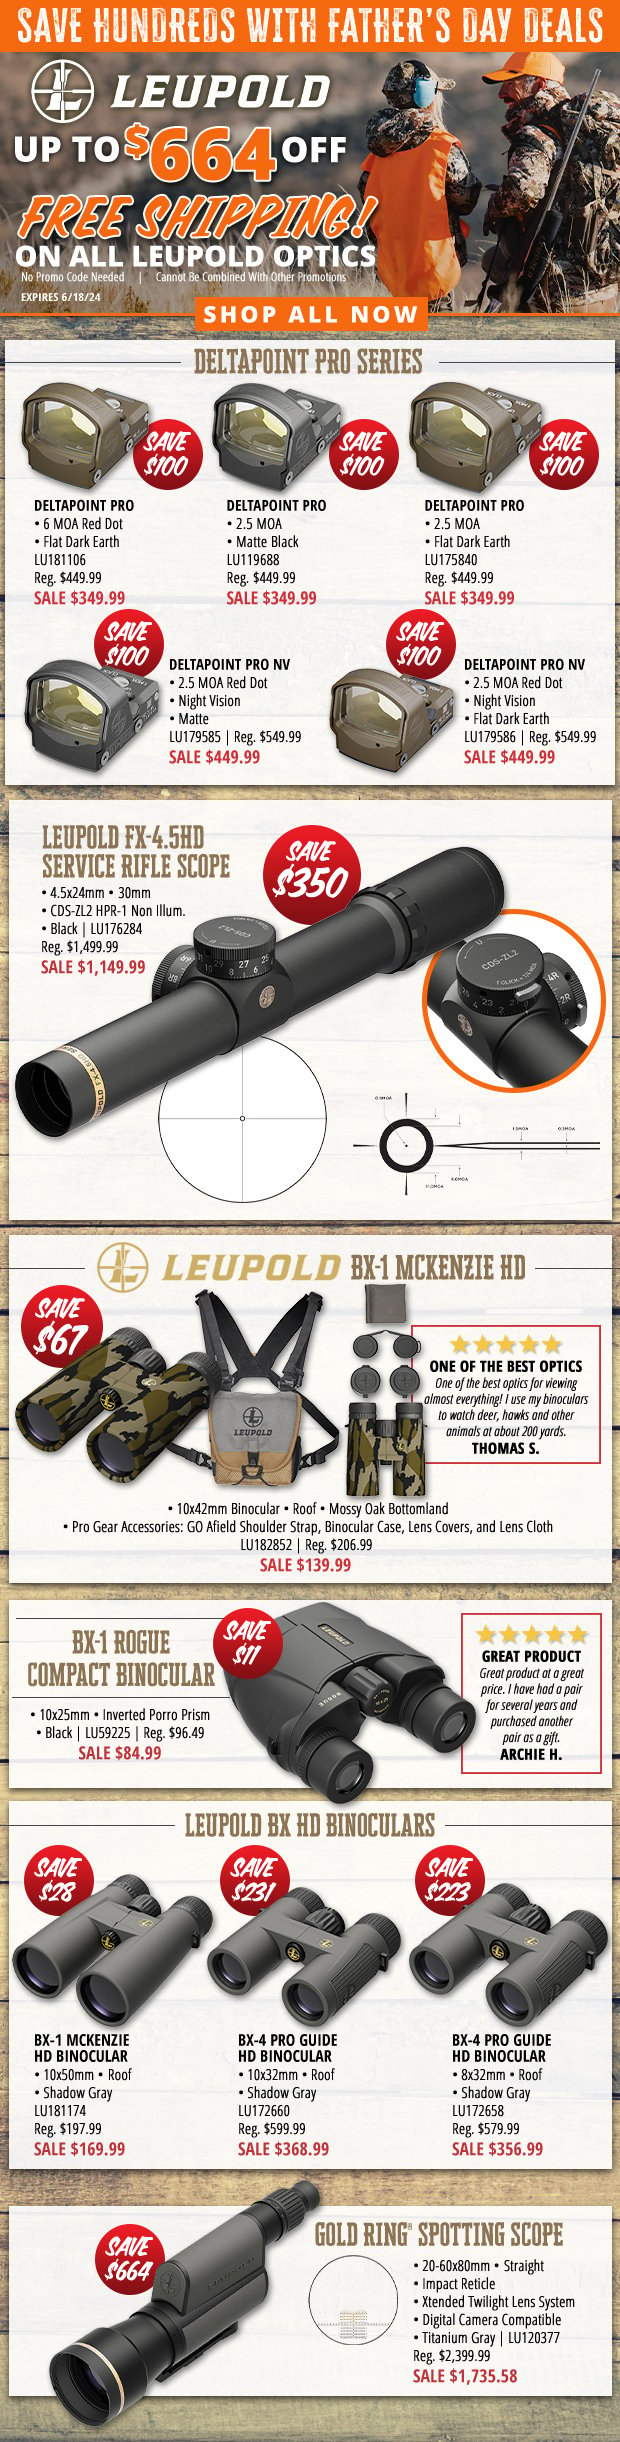 Up to $664 Off Leupold Optics Just in Time for Fathers Day